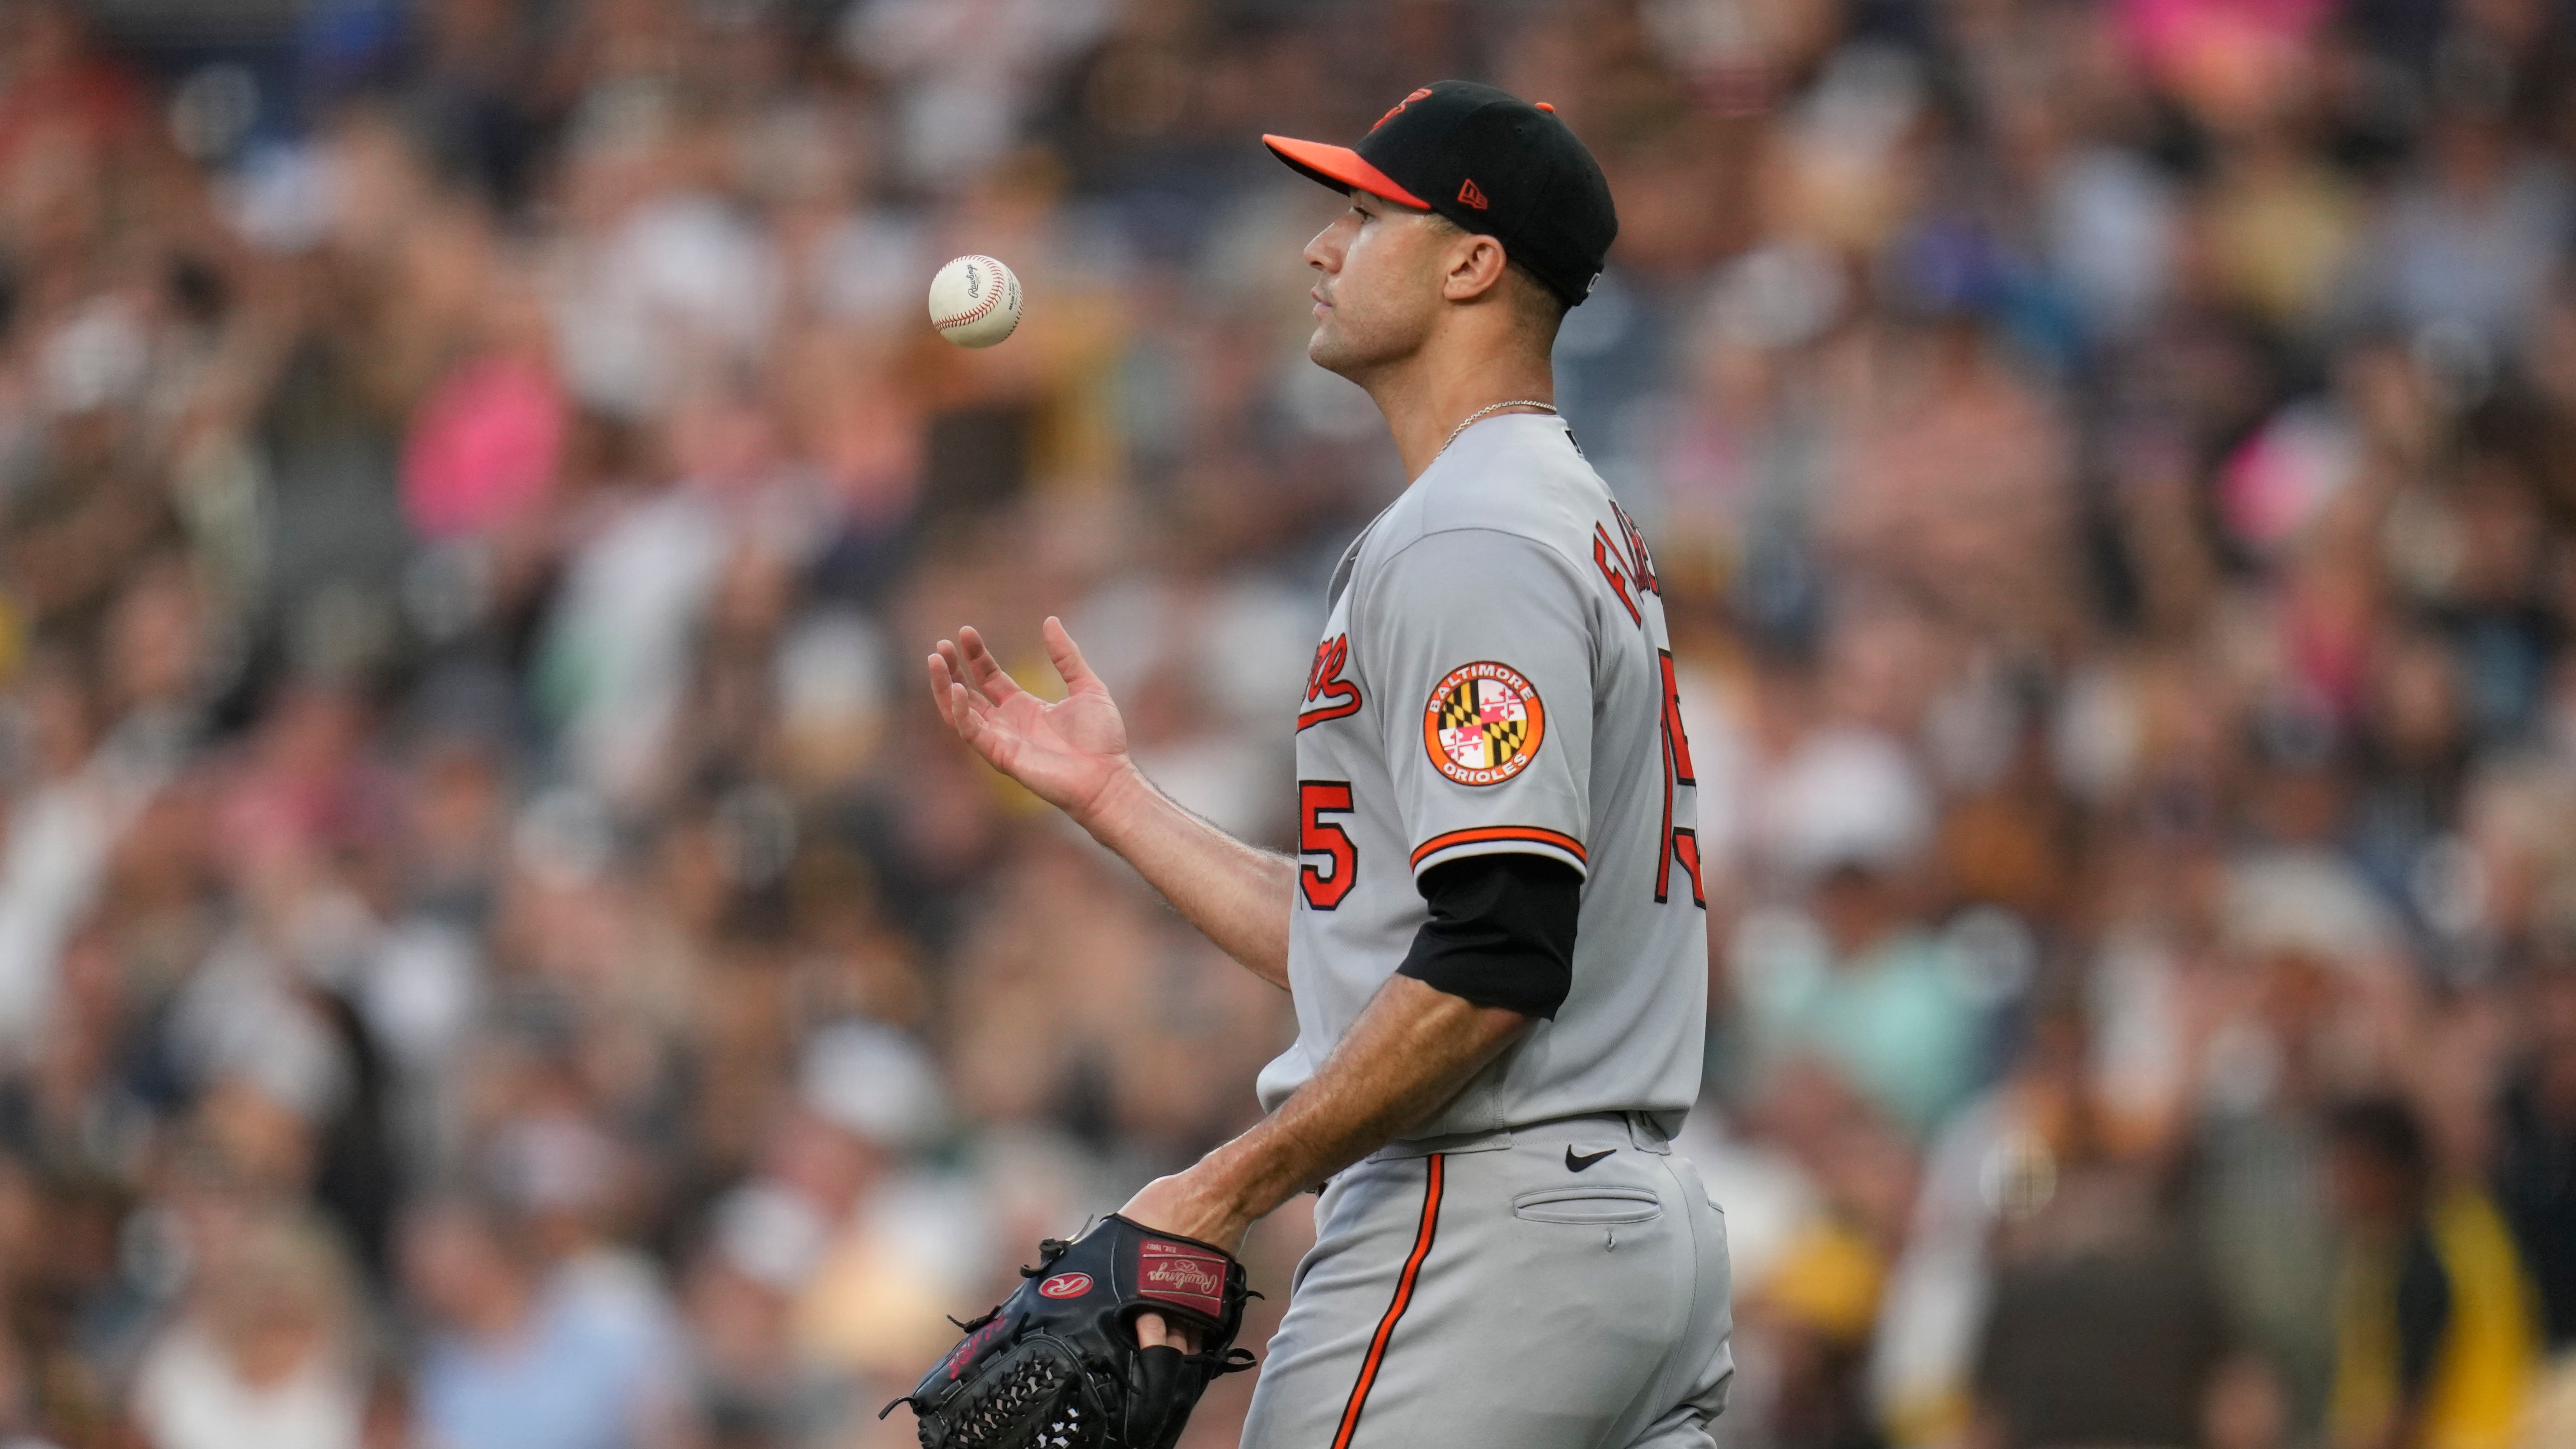 Orioles starter Jack Flaherty labors, catcher James McCann pitches in 10-3  loss to Padres: 'Just a bad night